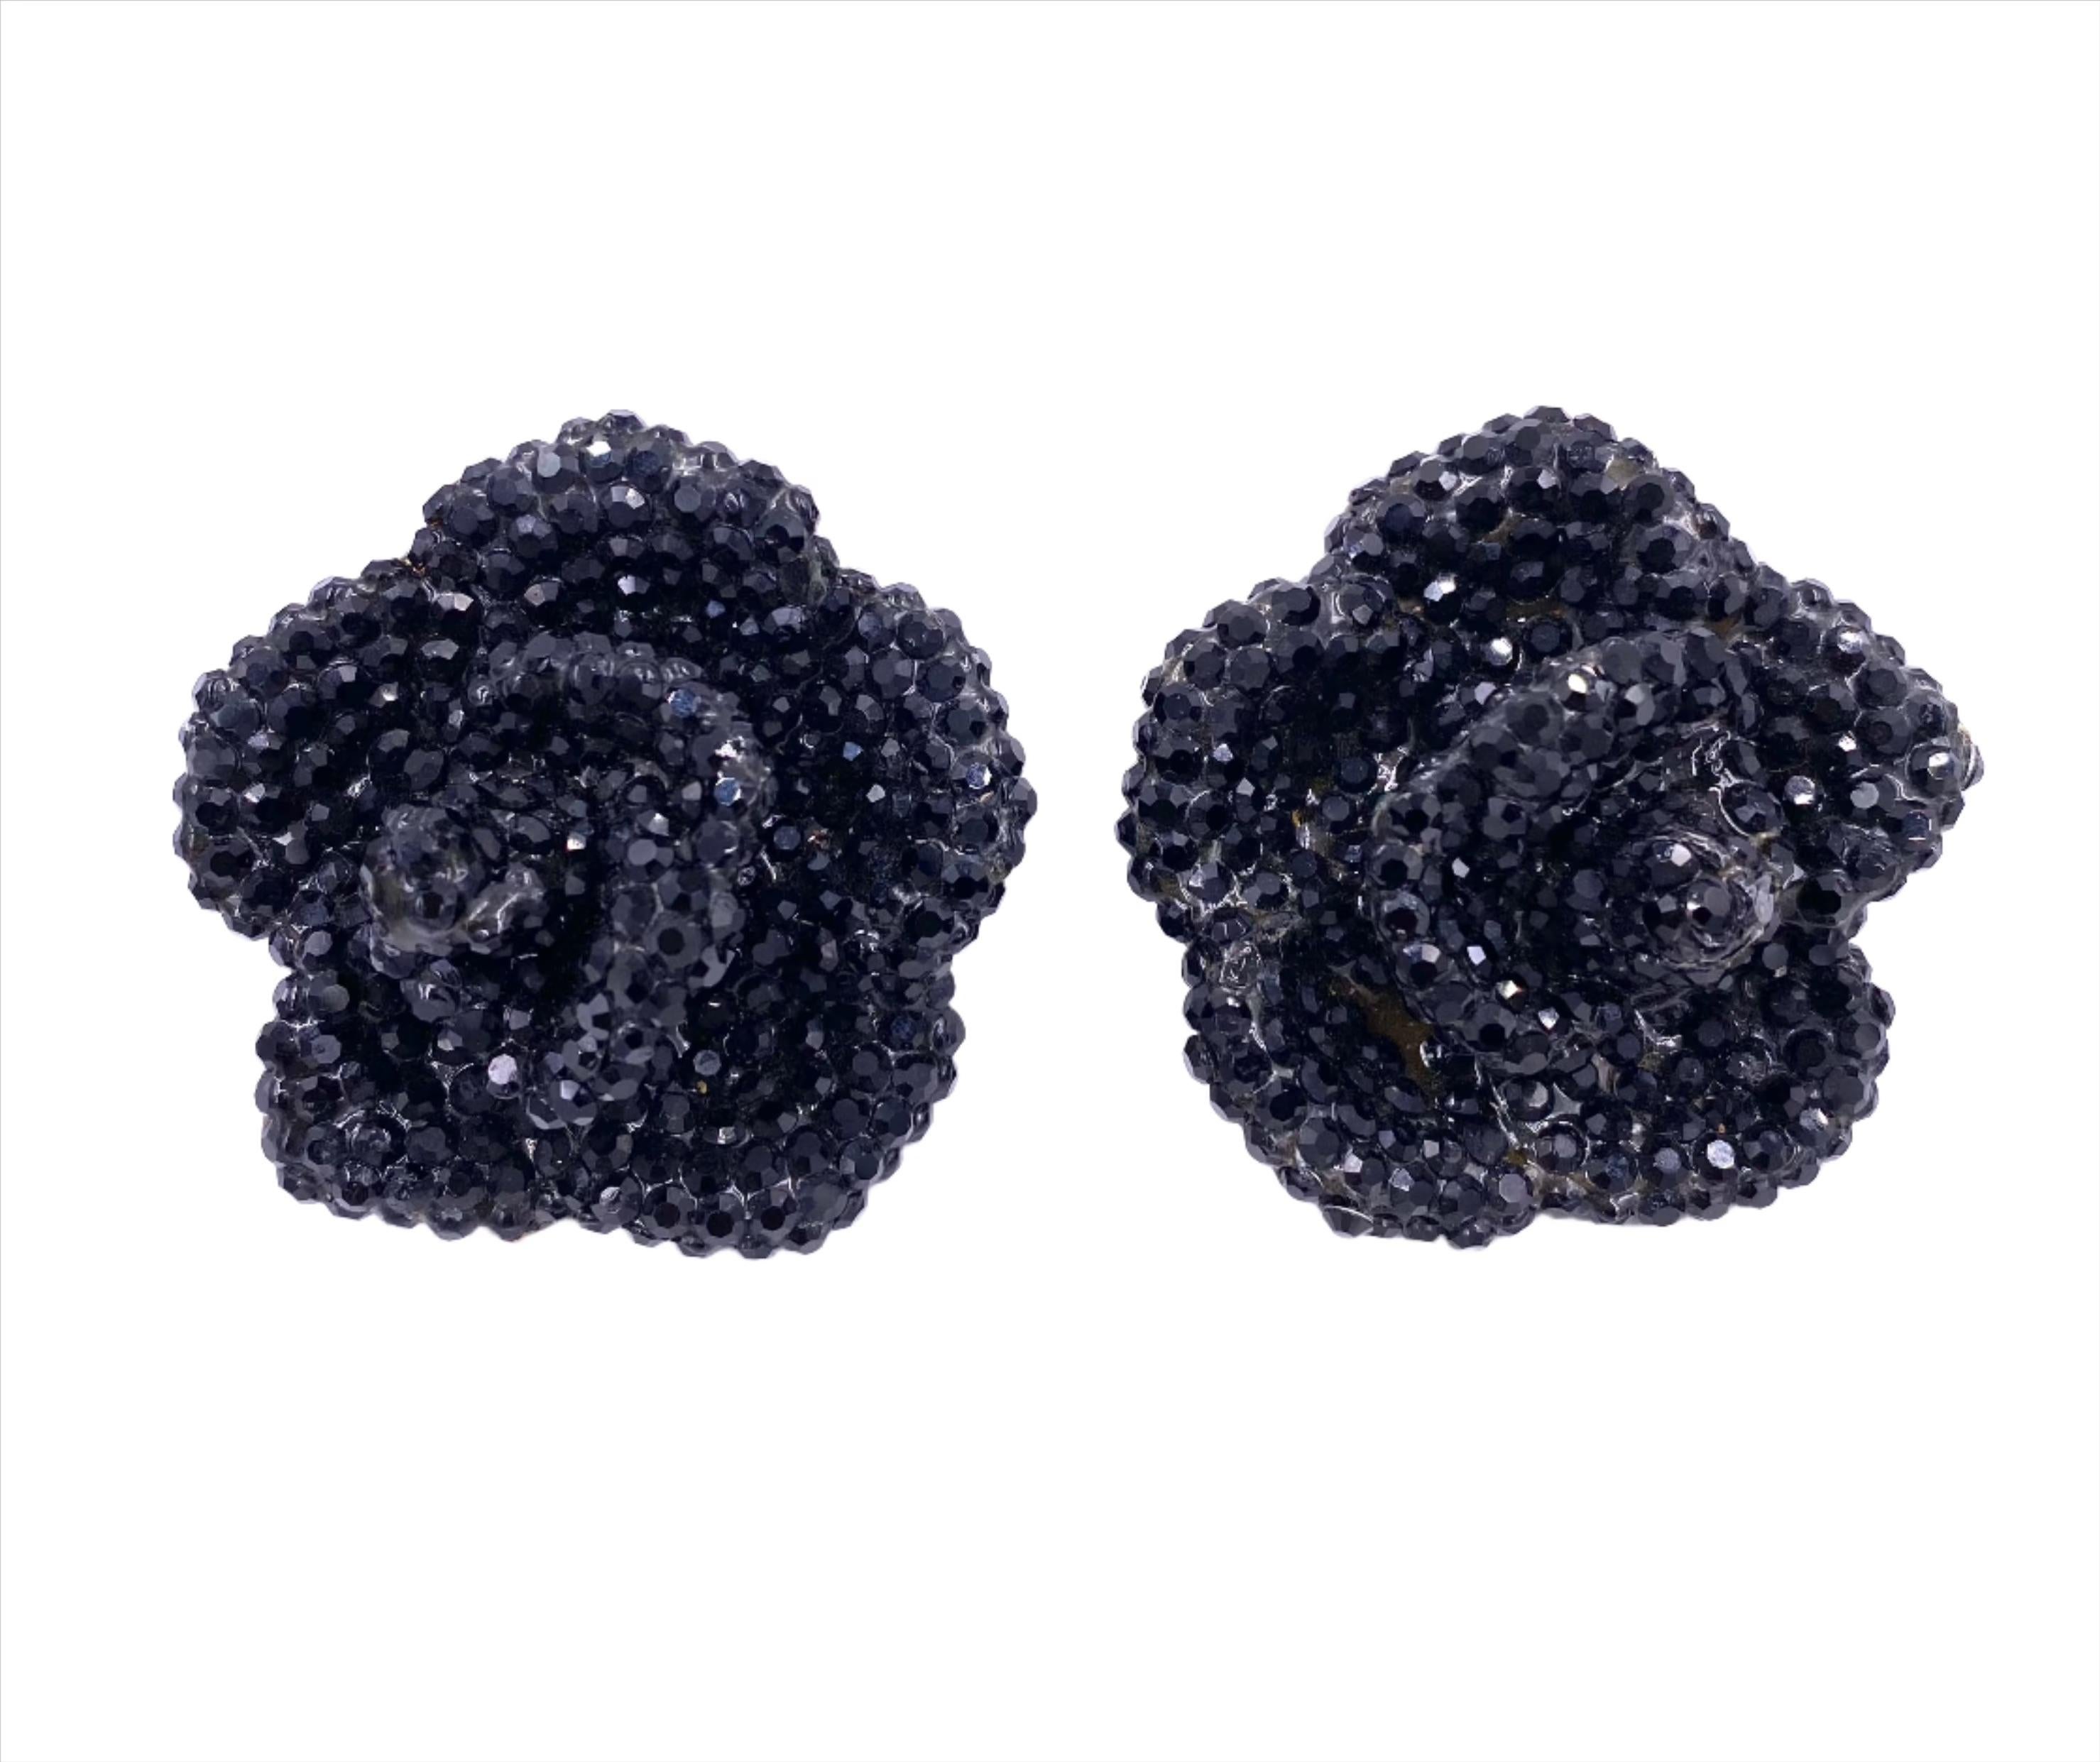 Indulge in luxury with our Vintage Large Black Stone Rose Clip-On Earrings. These elegant earrings feature stunning black rhinestone roses, perfect for special occasions. Stand out and add a touch of glamour with these beautifully encrusted